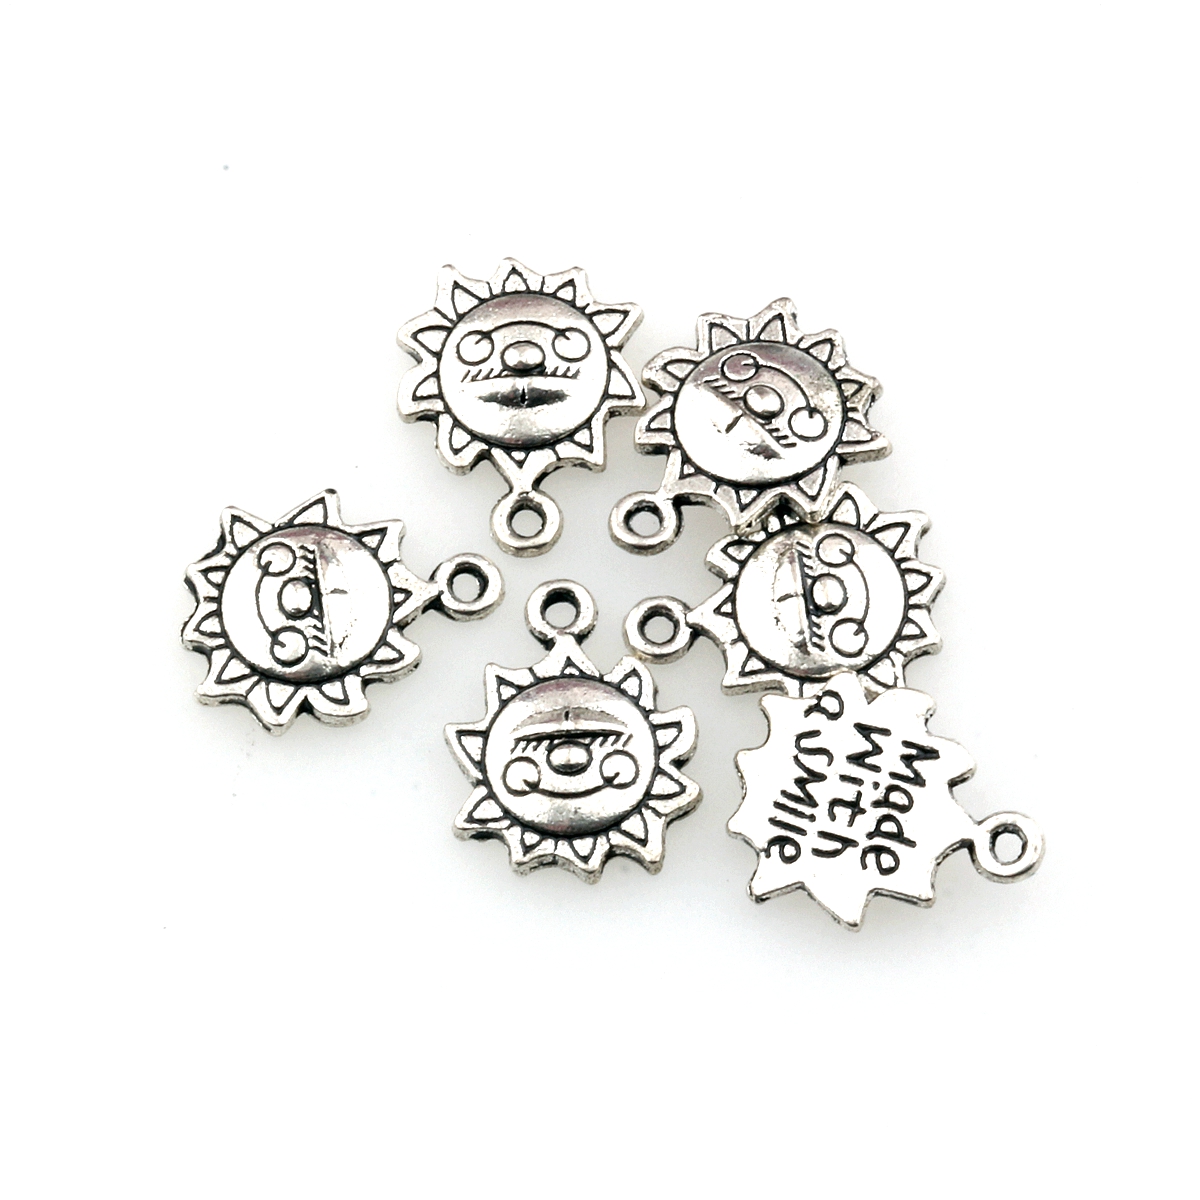 Antique Silver Flowers Charms Pendants For Jewelry Making DIY Handmade Craft